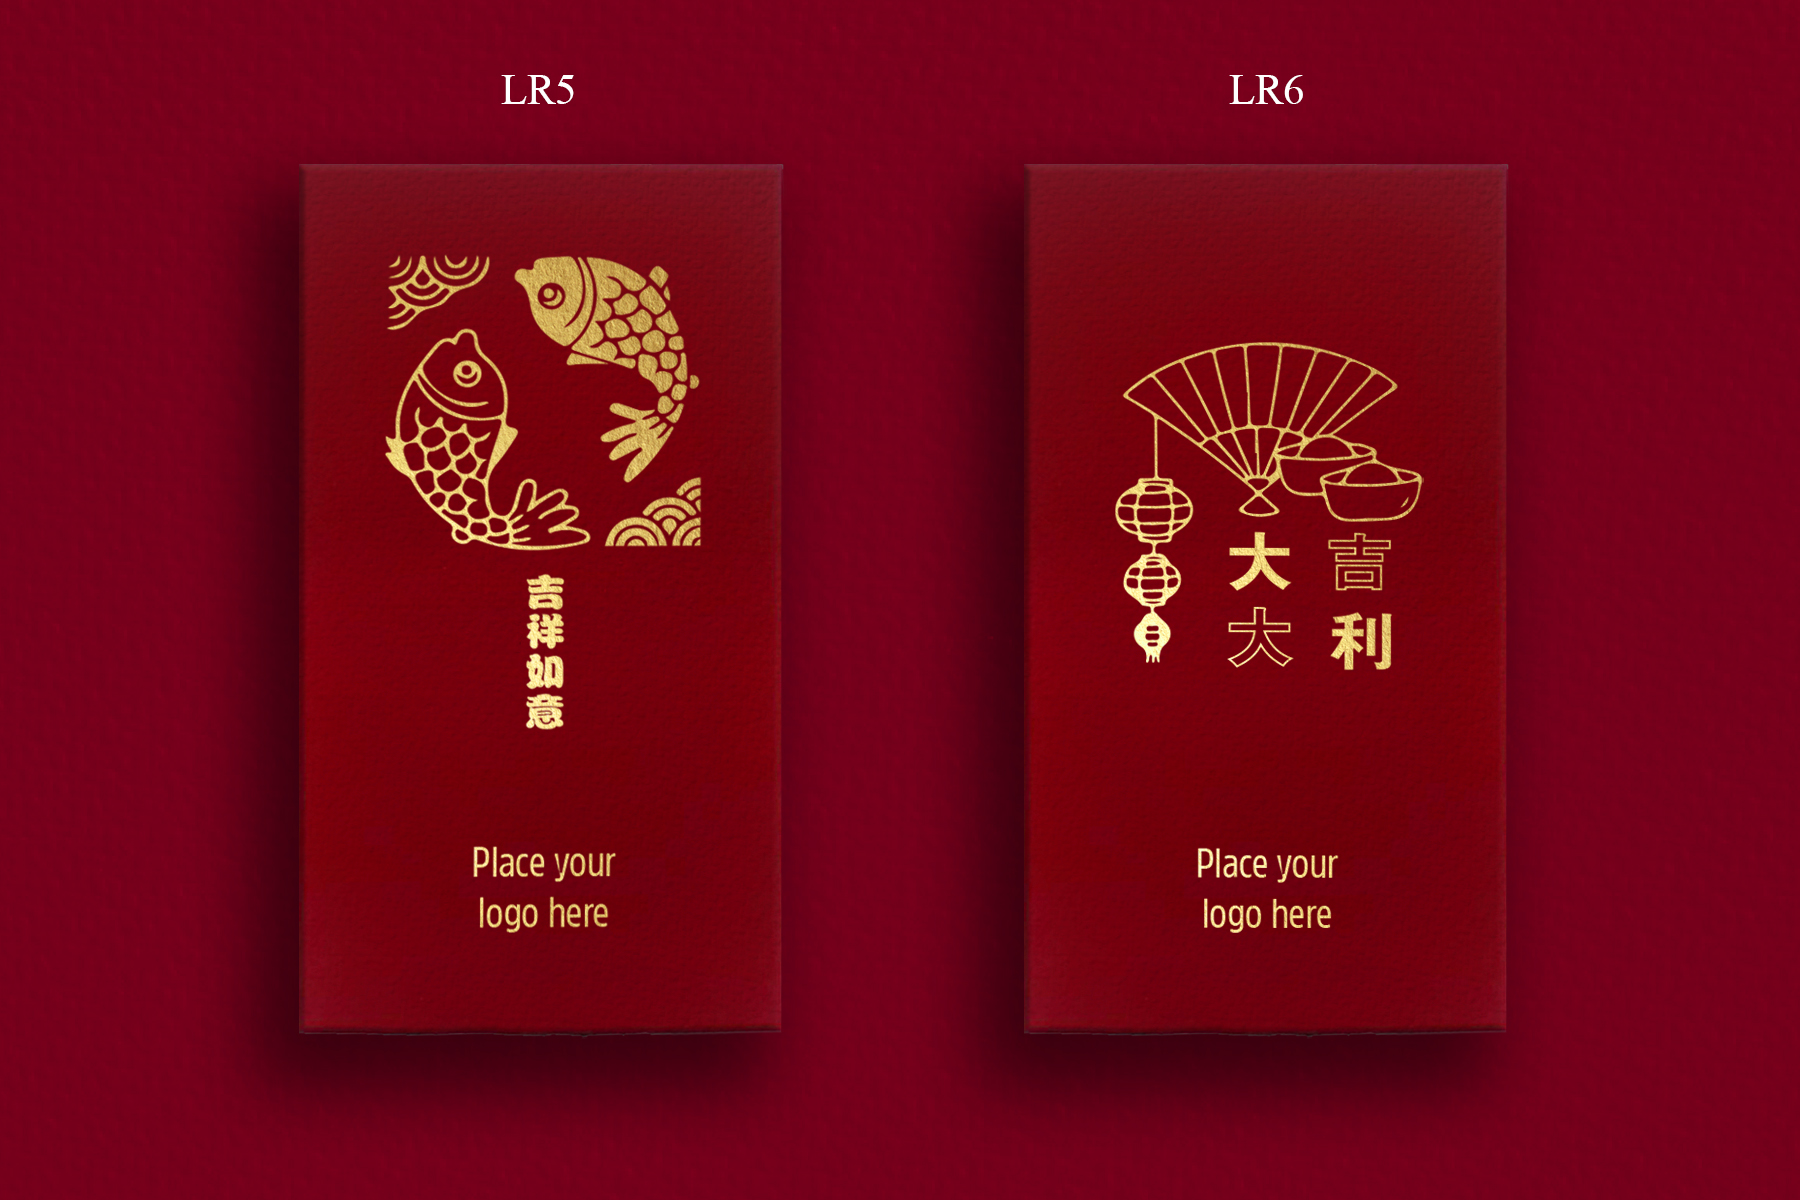 Branded luxury Red packet